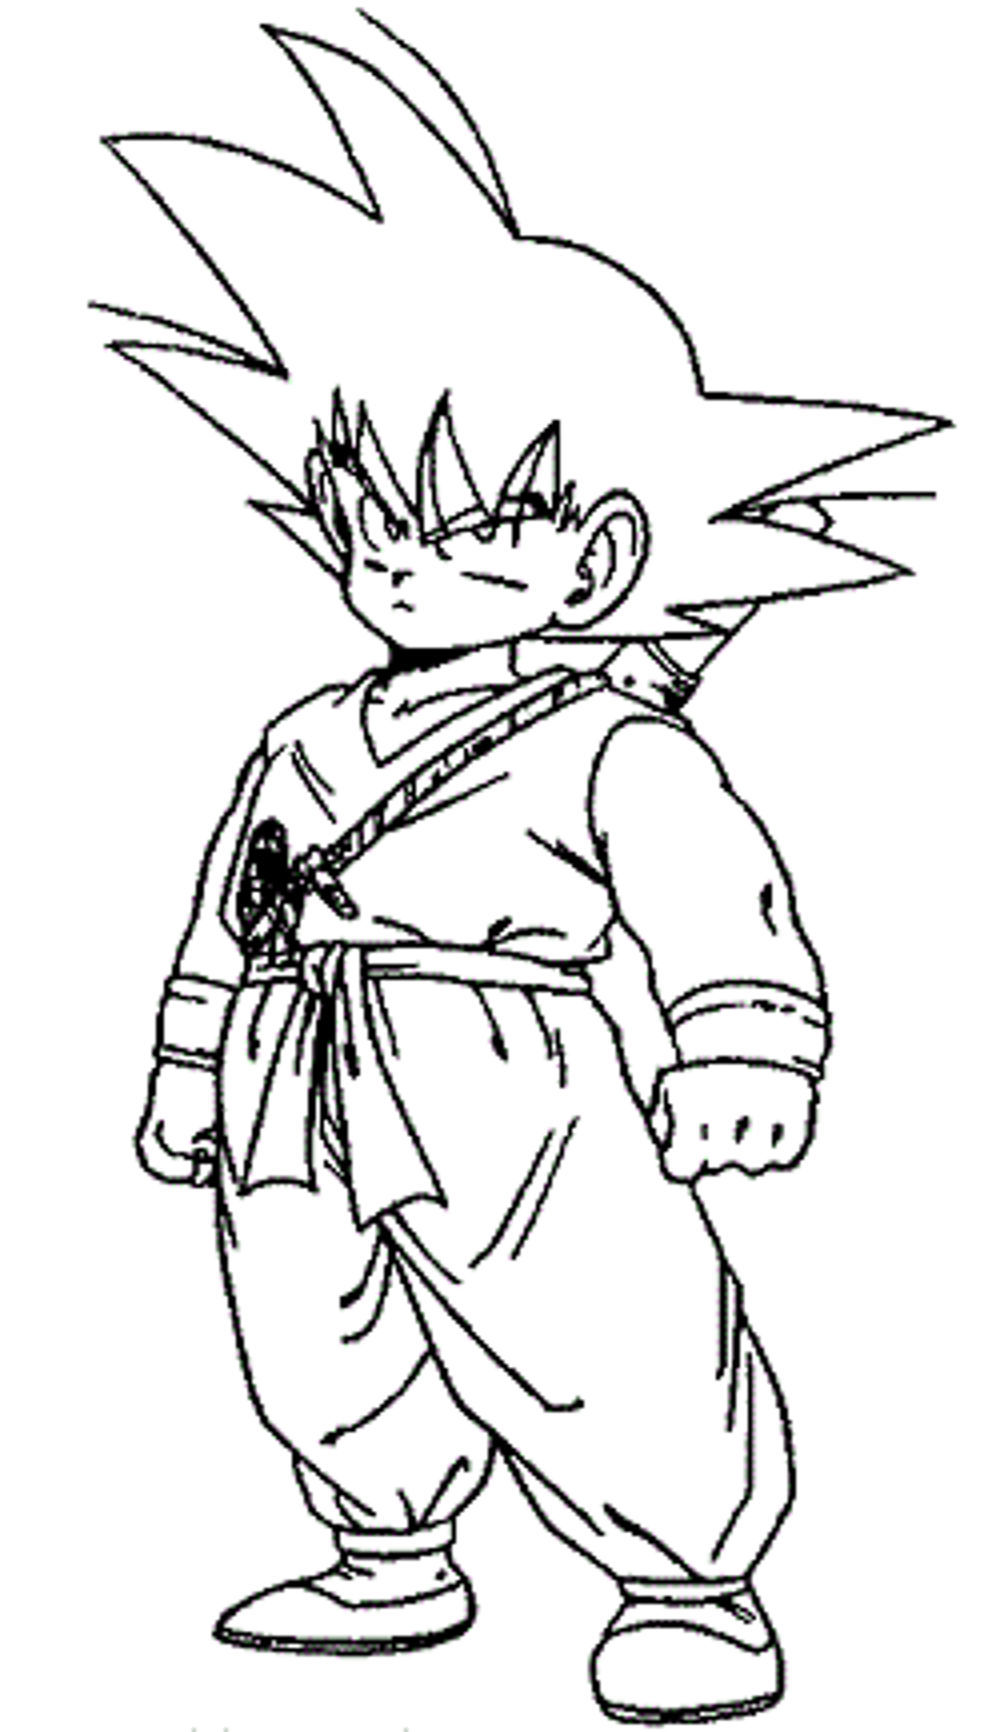 Goku Coloring Pages at GetDrawings | Free download